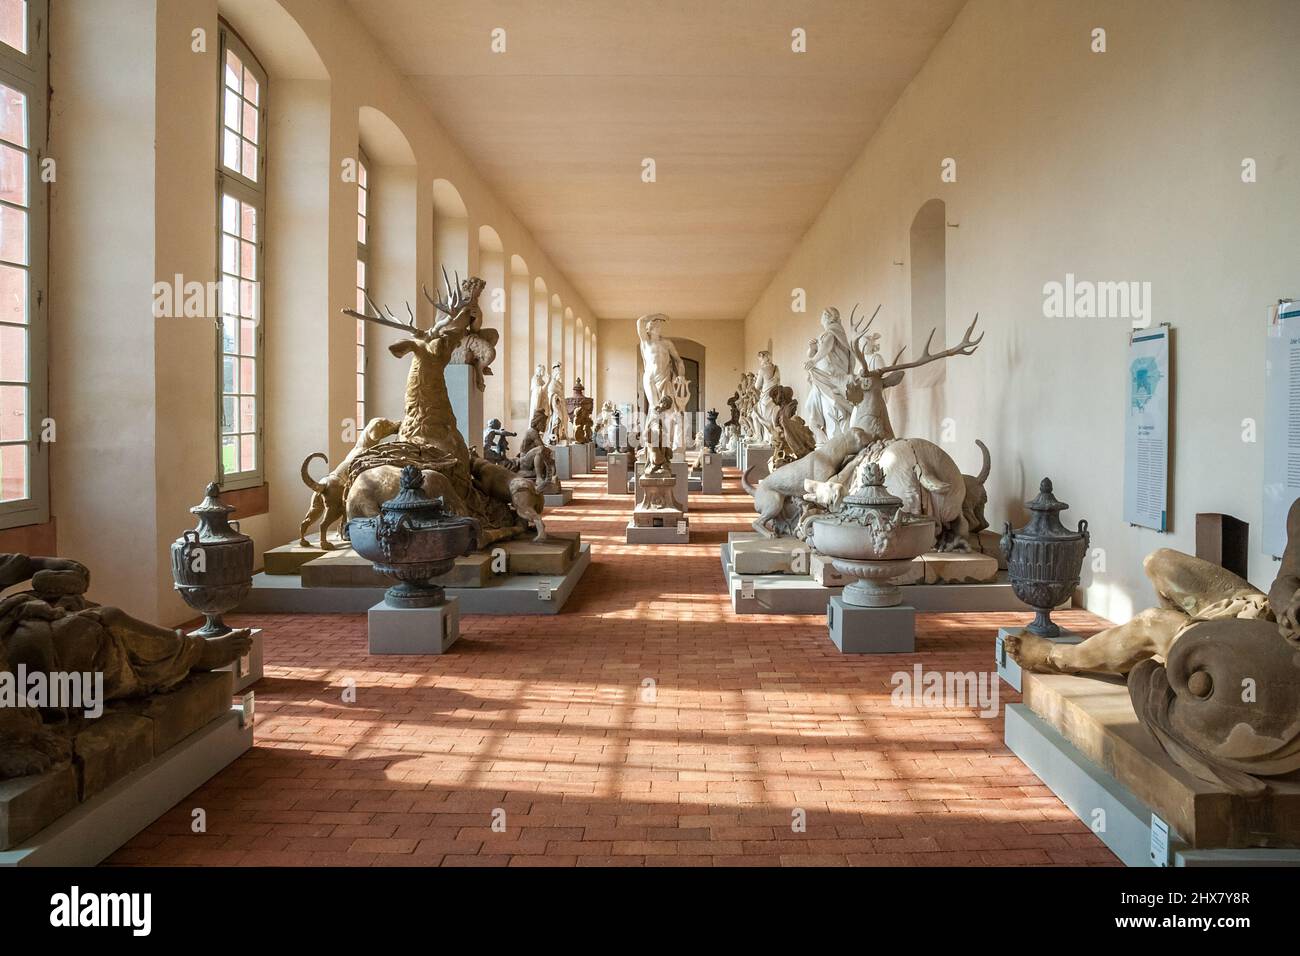 Great view inside the west wing of the orangery in the famous Schwetzingen Palace, Germany, where the original garden figures are set up to form a... Stock Photo